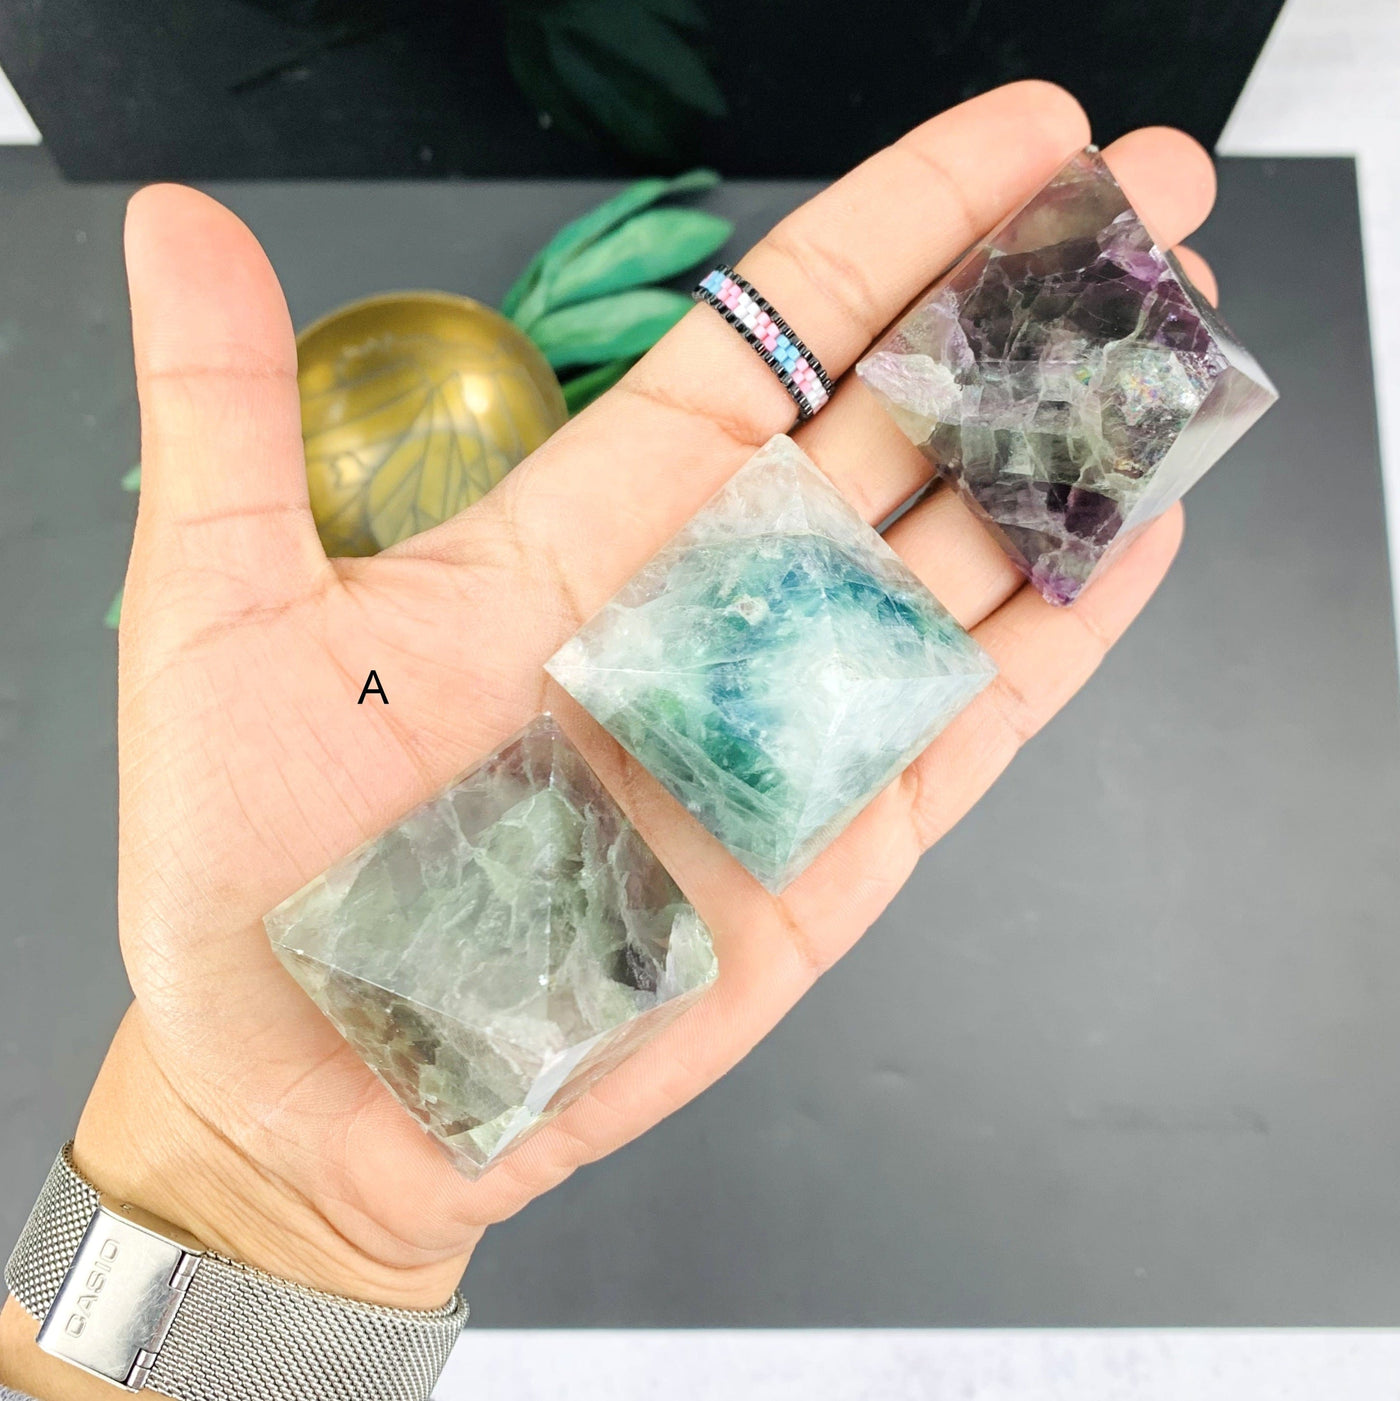 Set A of the Small Fluorite Pyramid on hand